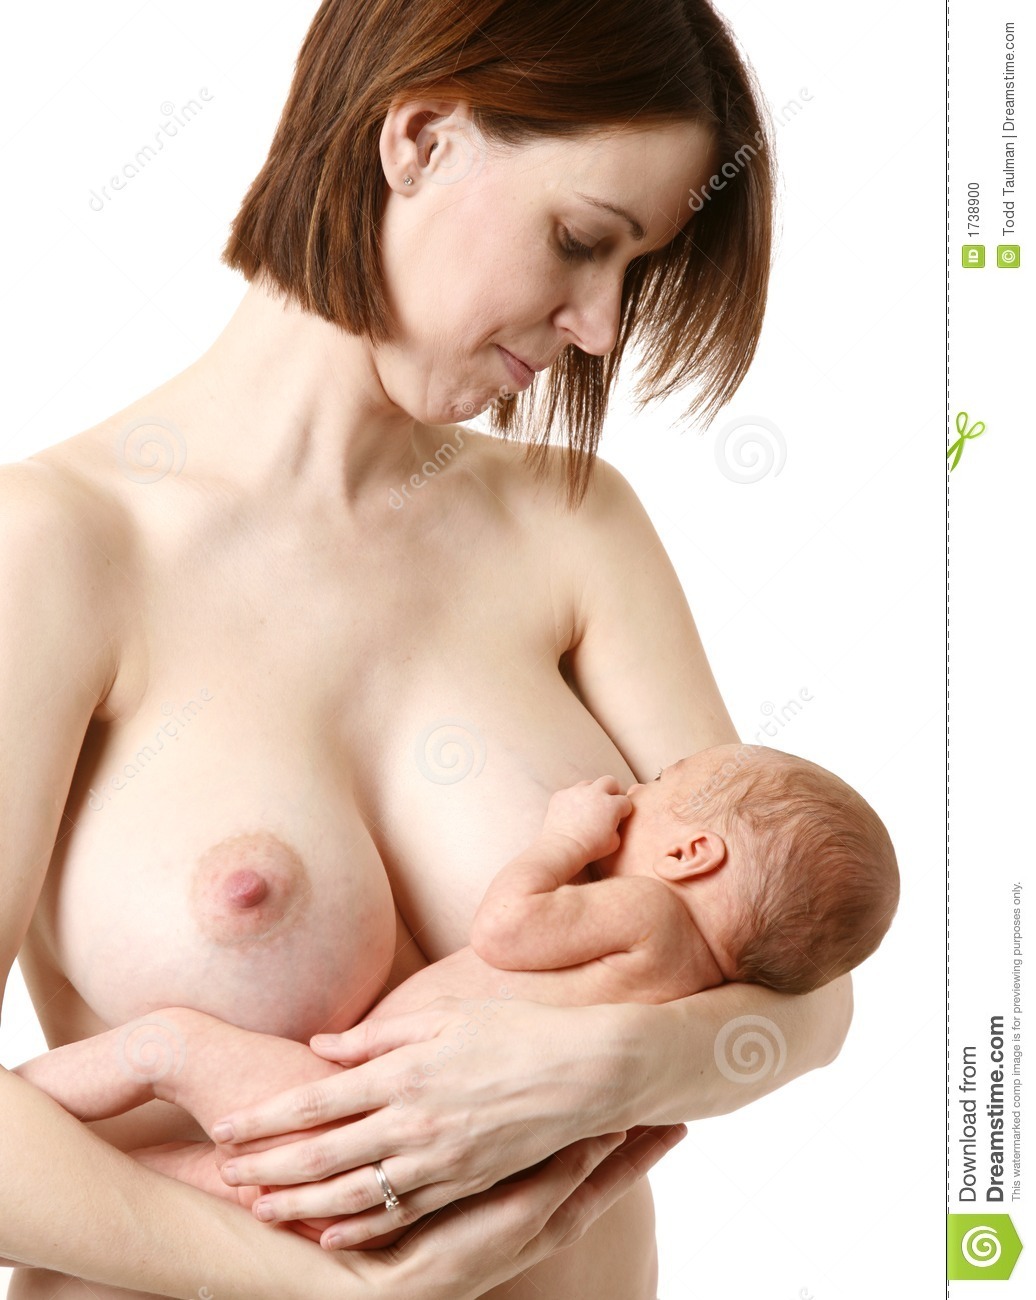 Japanese son sleeping his mother for nipple